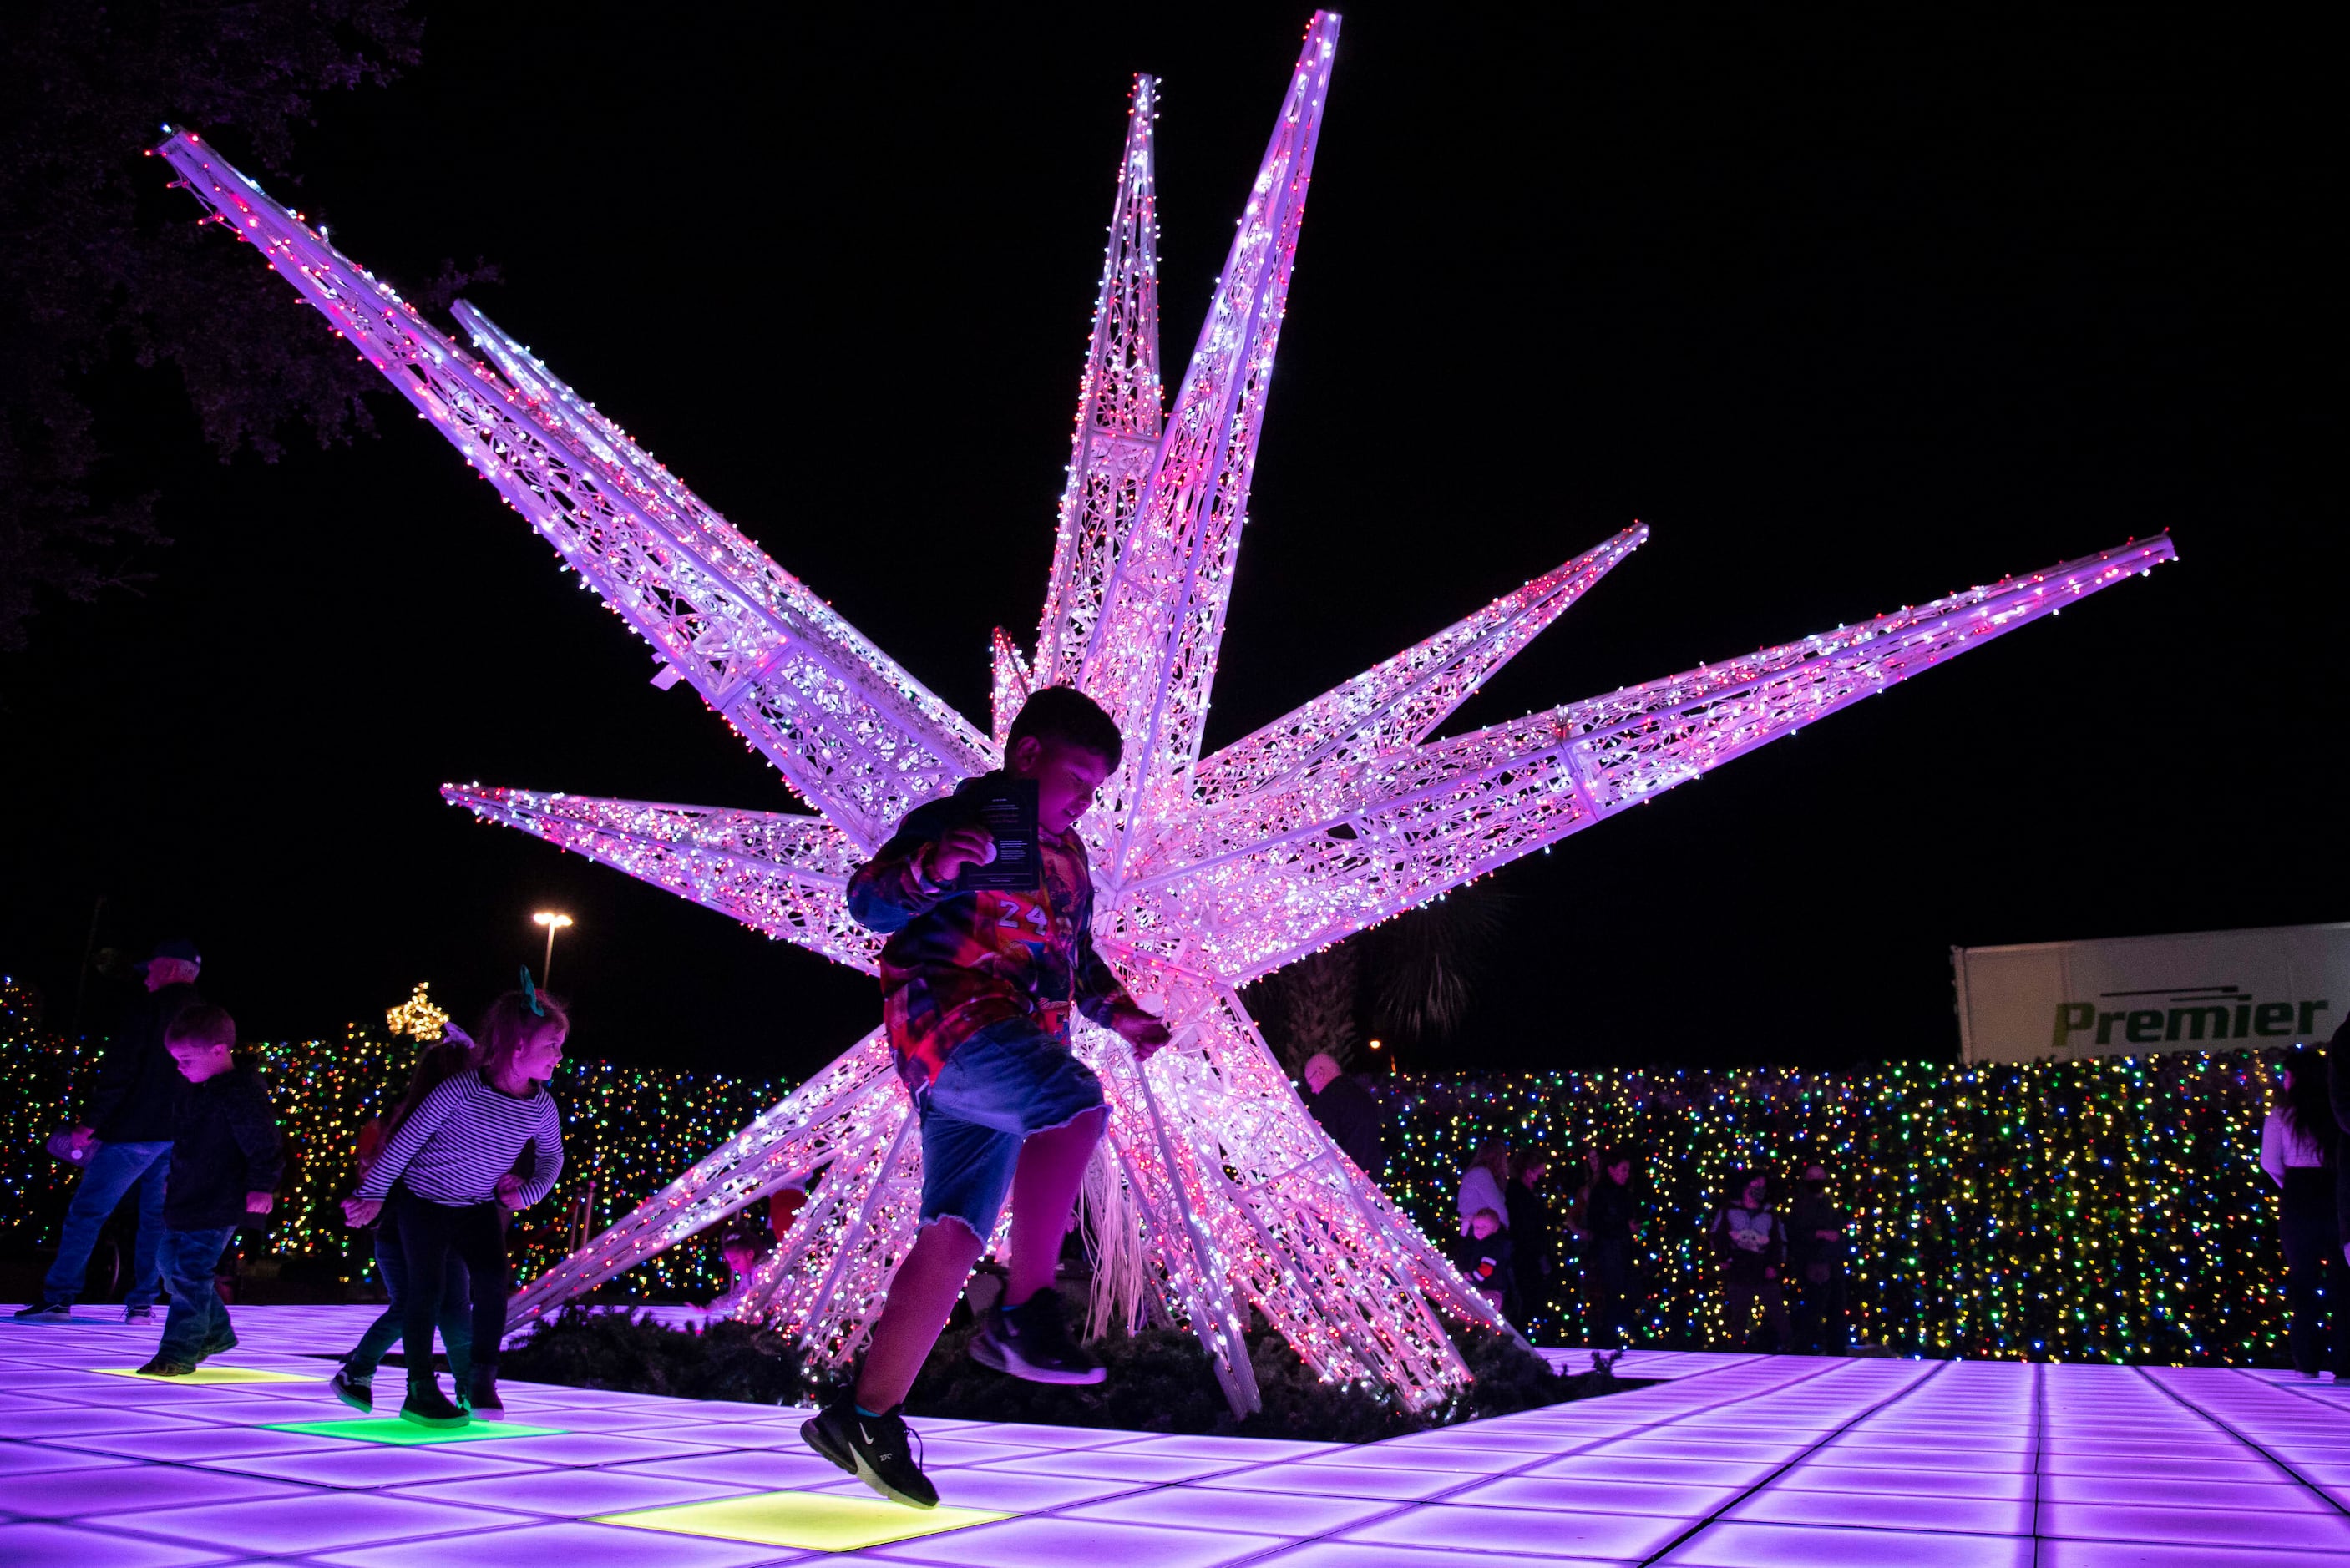 Enchant at Fair Park has millions of lights, including a light maze and an 80-foot-tall tree.